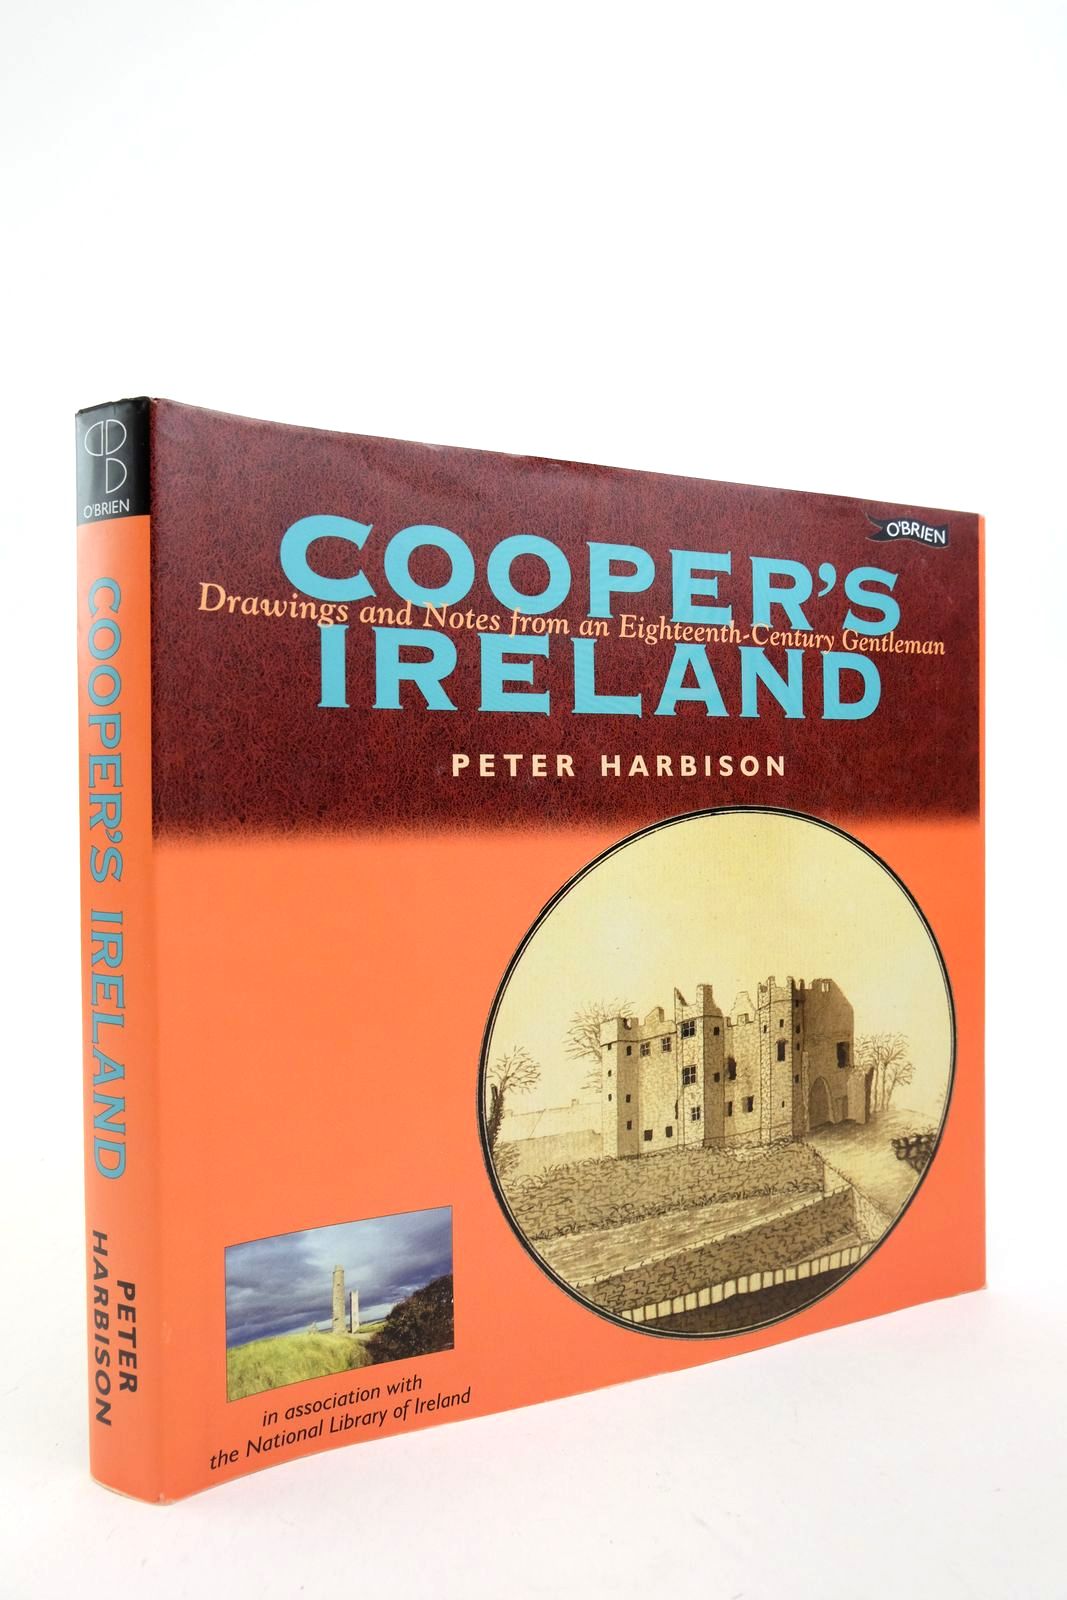 Photo of COOPER'S IRELAND: DRAWINGS AND NOTES FROM AN EIGHTEENTH-CENTURY GENTLEMAN written by Harbison, Peter published by The O'Brien Press Ltd. (STOCK CODE: 2140721)  for sale by Stella & Rose's Books